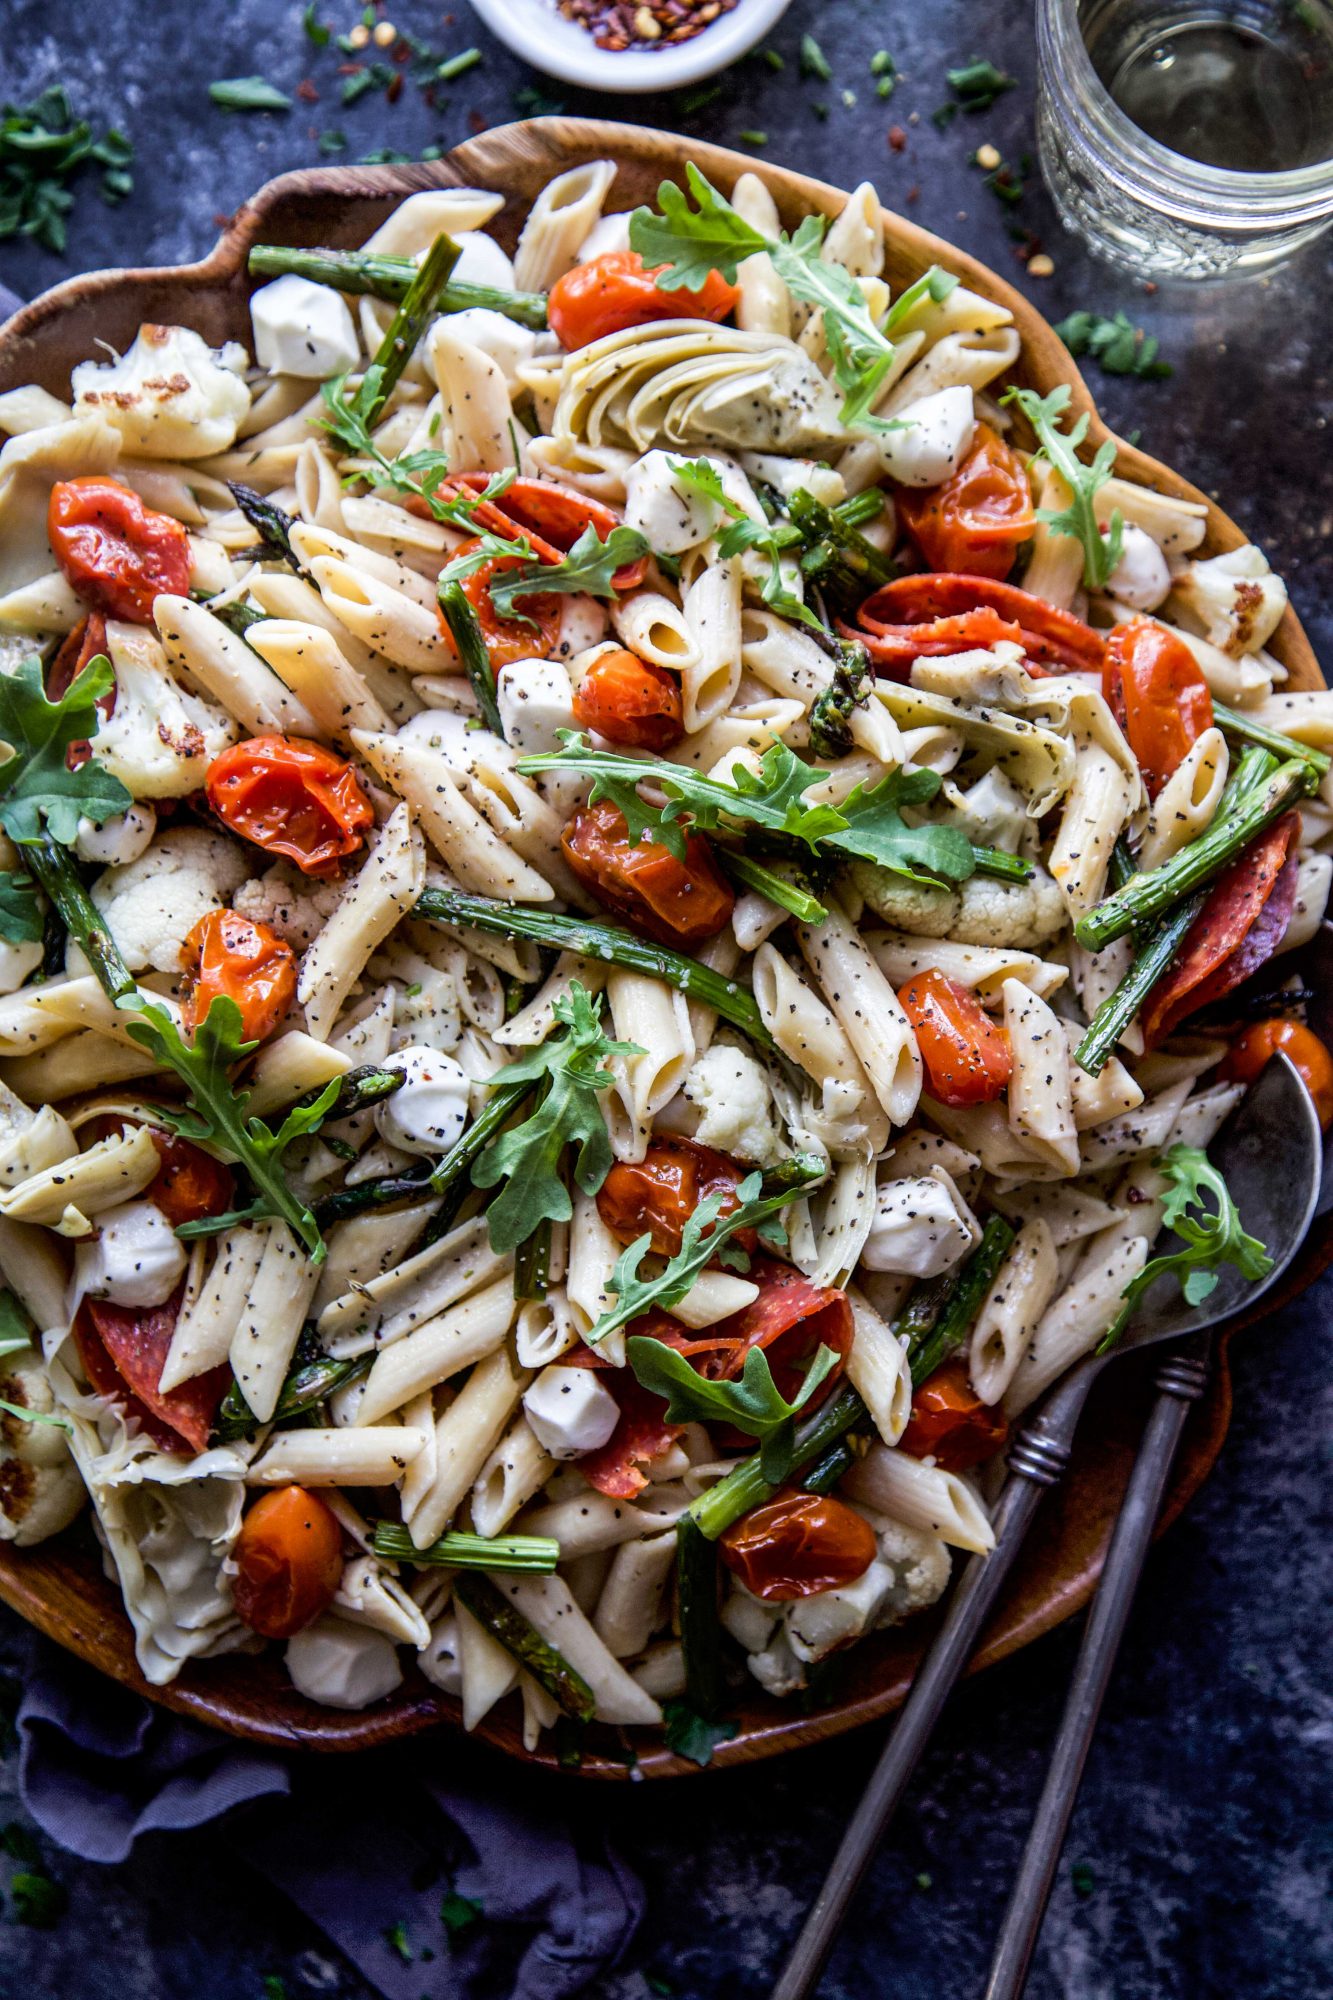 Spring Chickpea Pasta with Roasted Vegetables - The Curious Plate